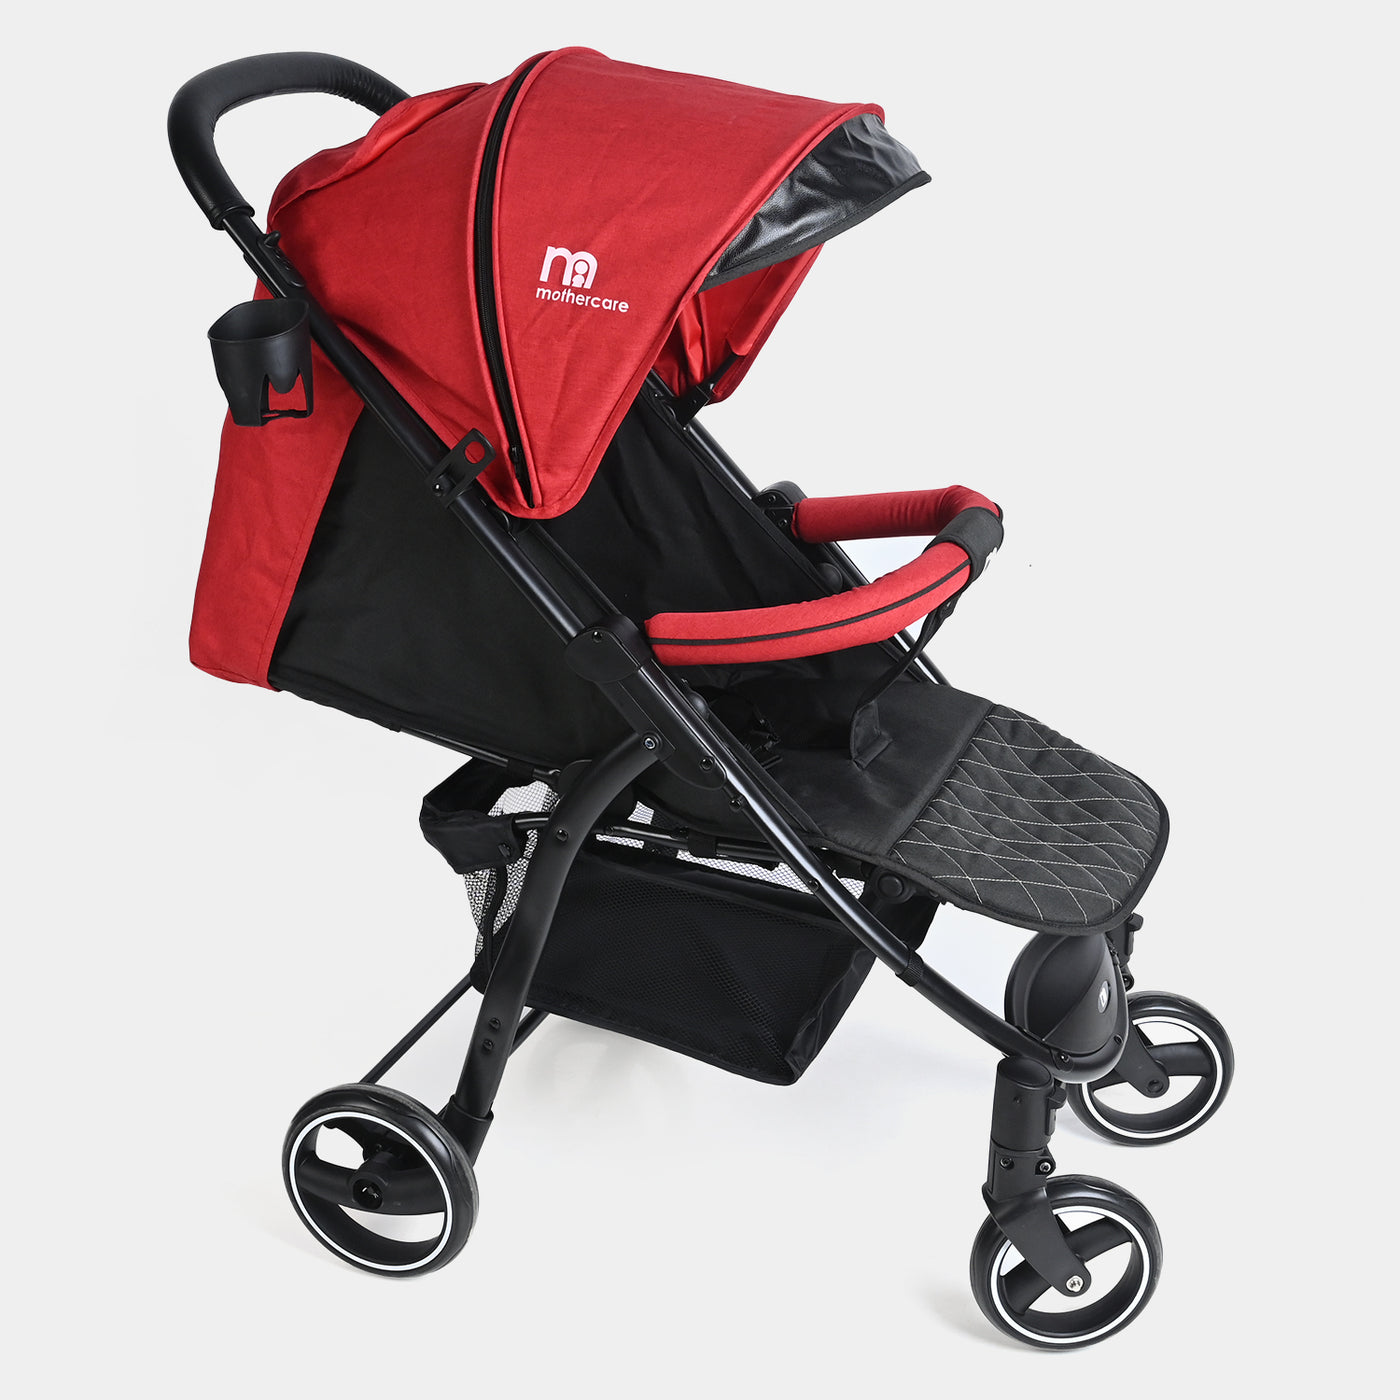 Baby Stroller (Mothercare) MC-906 Red